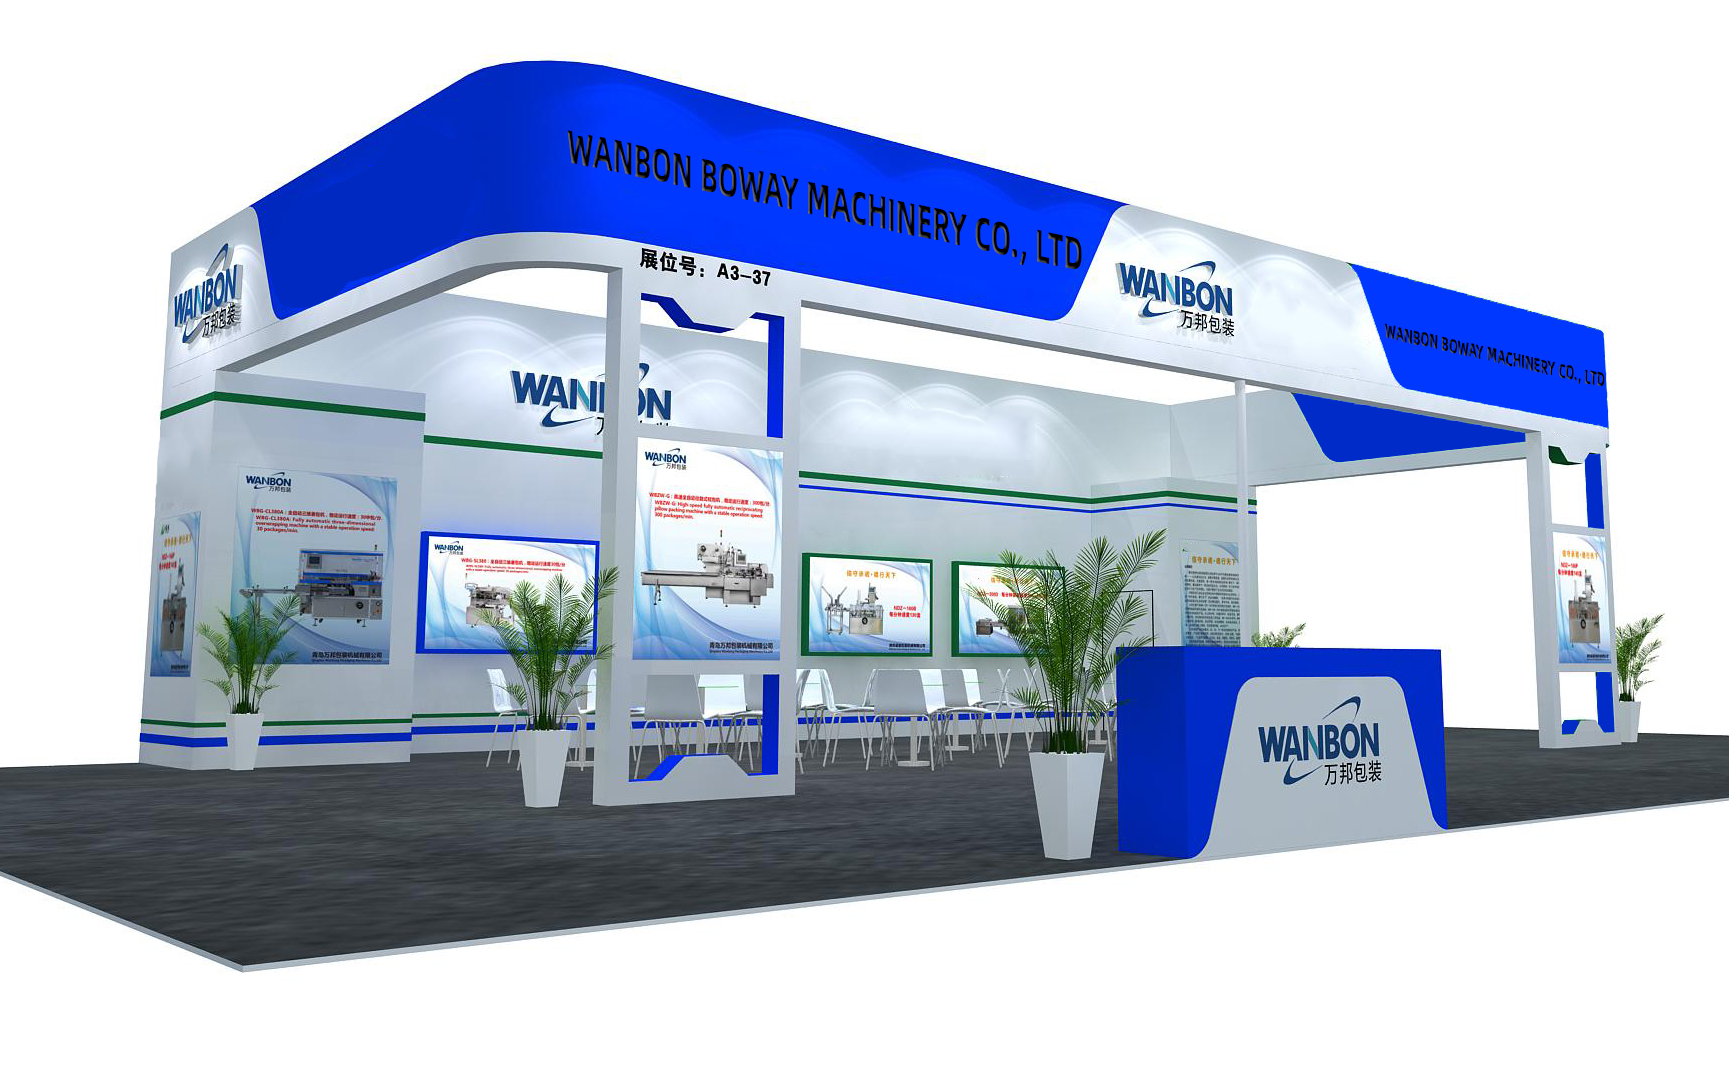 The 61st China International Pharmaceutical Machinery Exposition